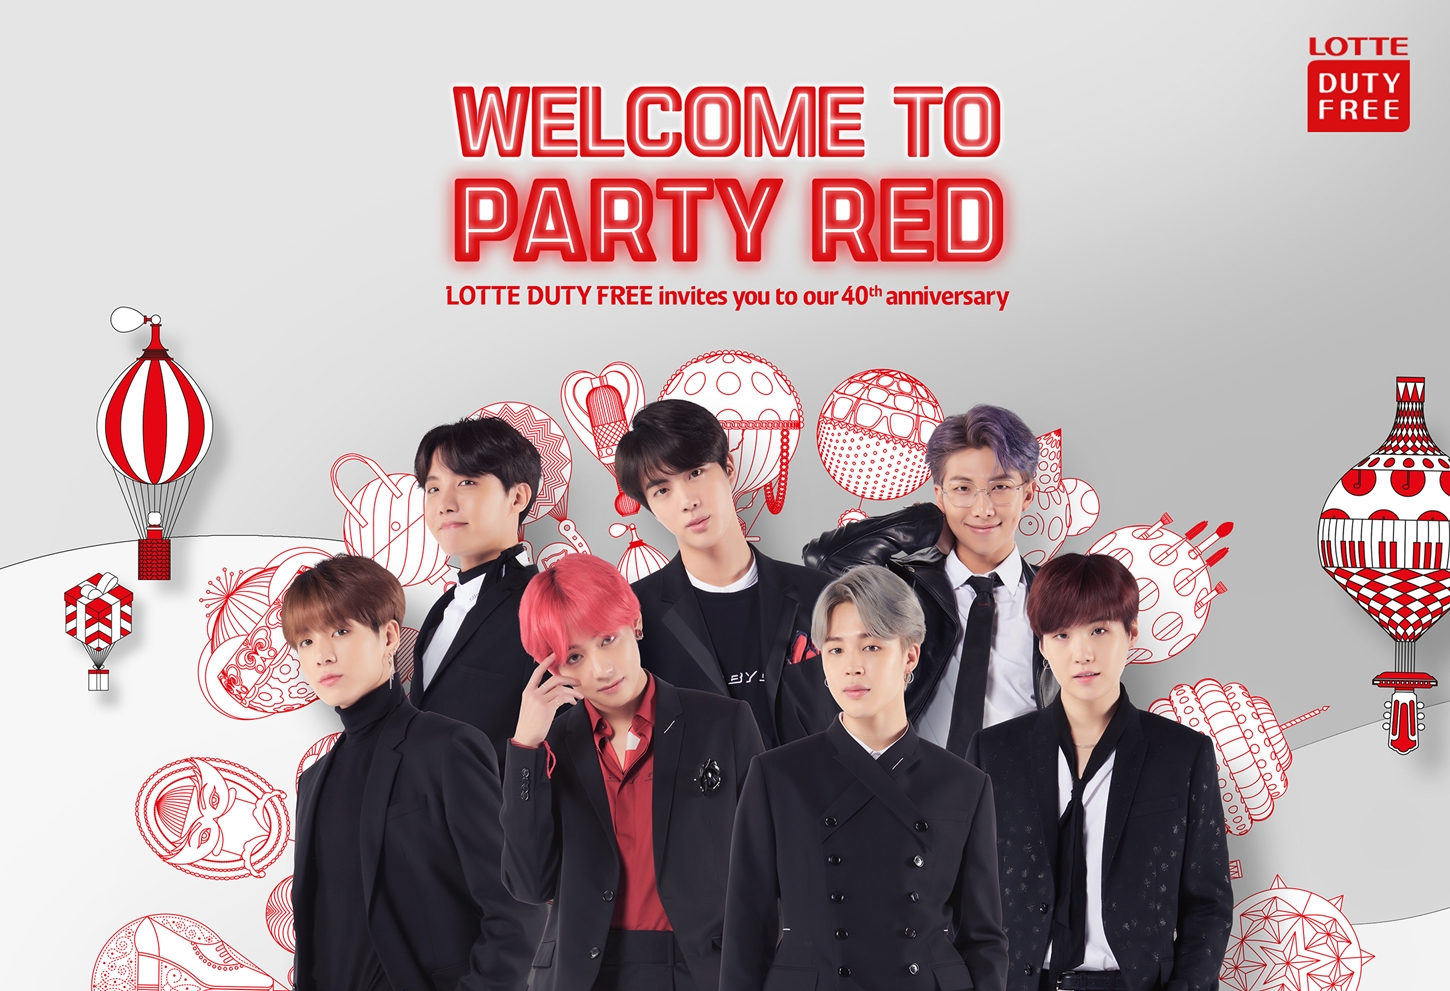 Lotte Duty Free begins a year of 40th anniversary celebrations